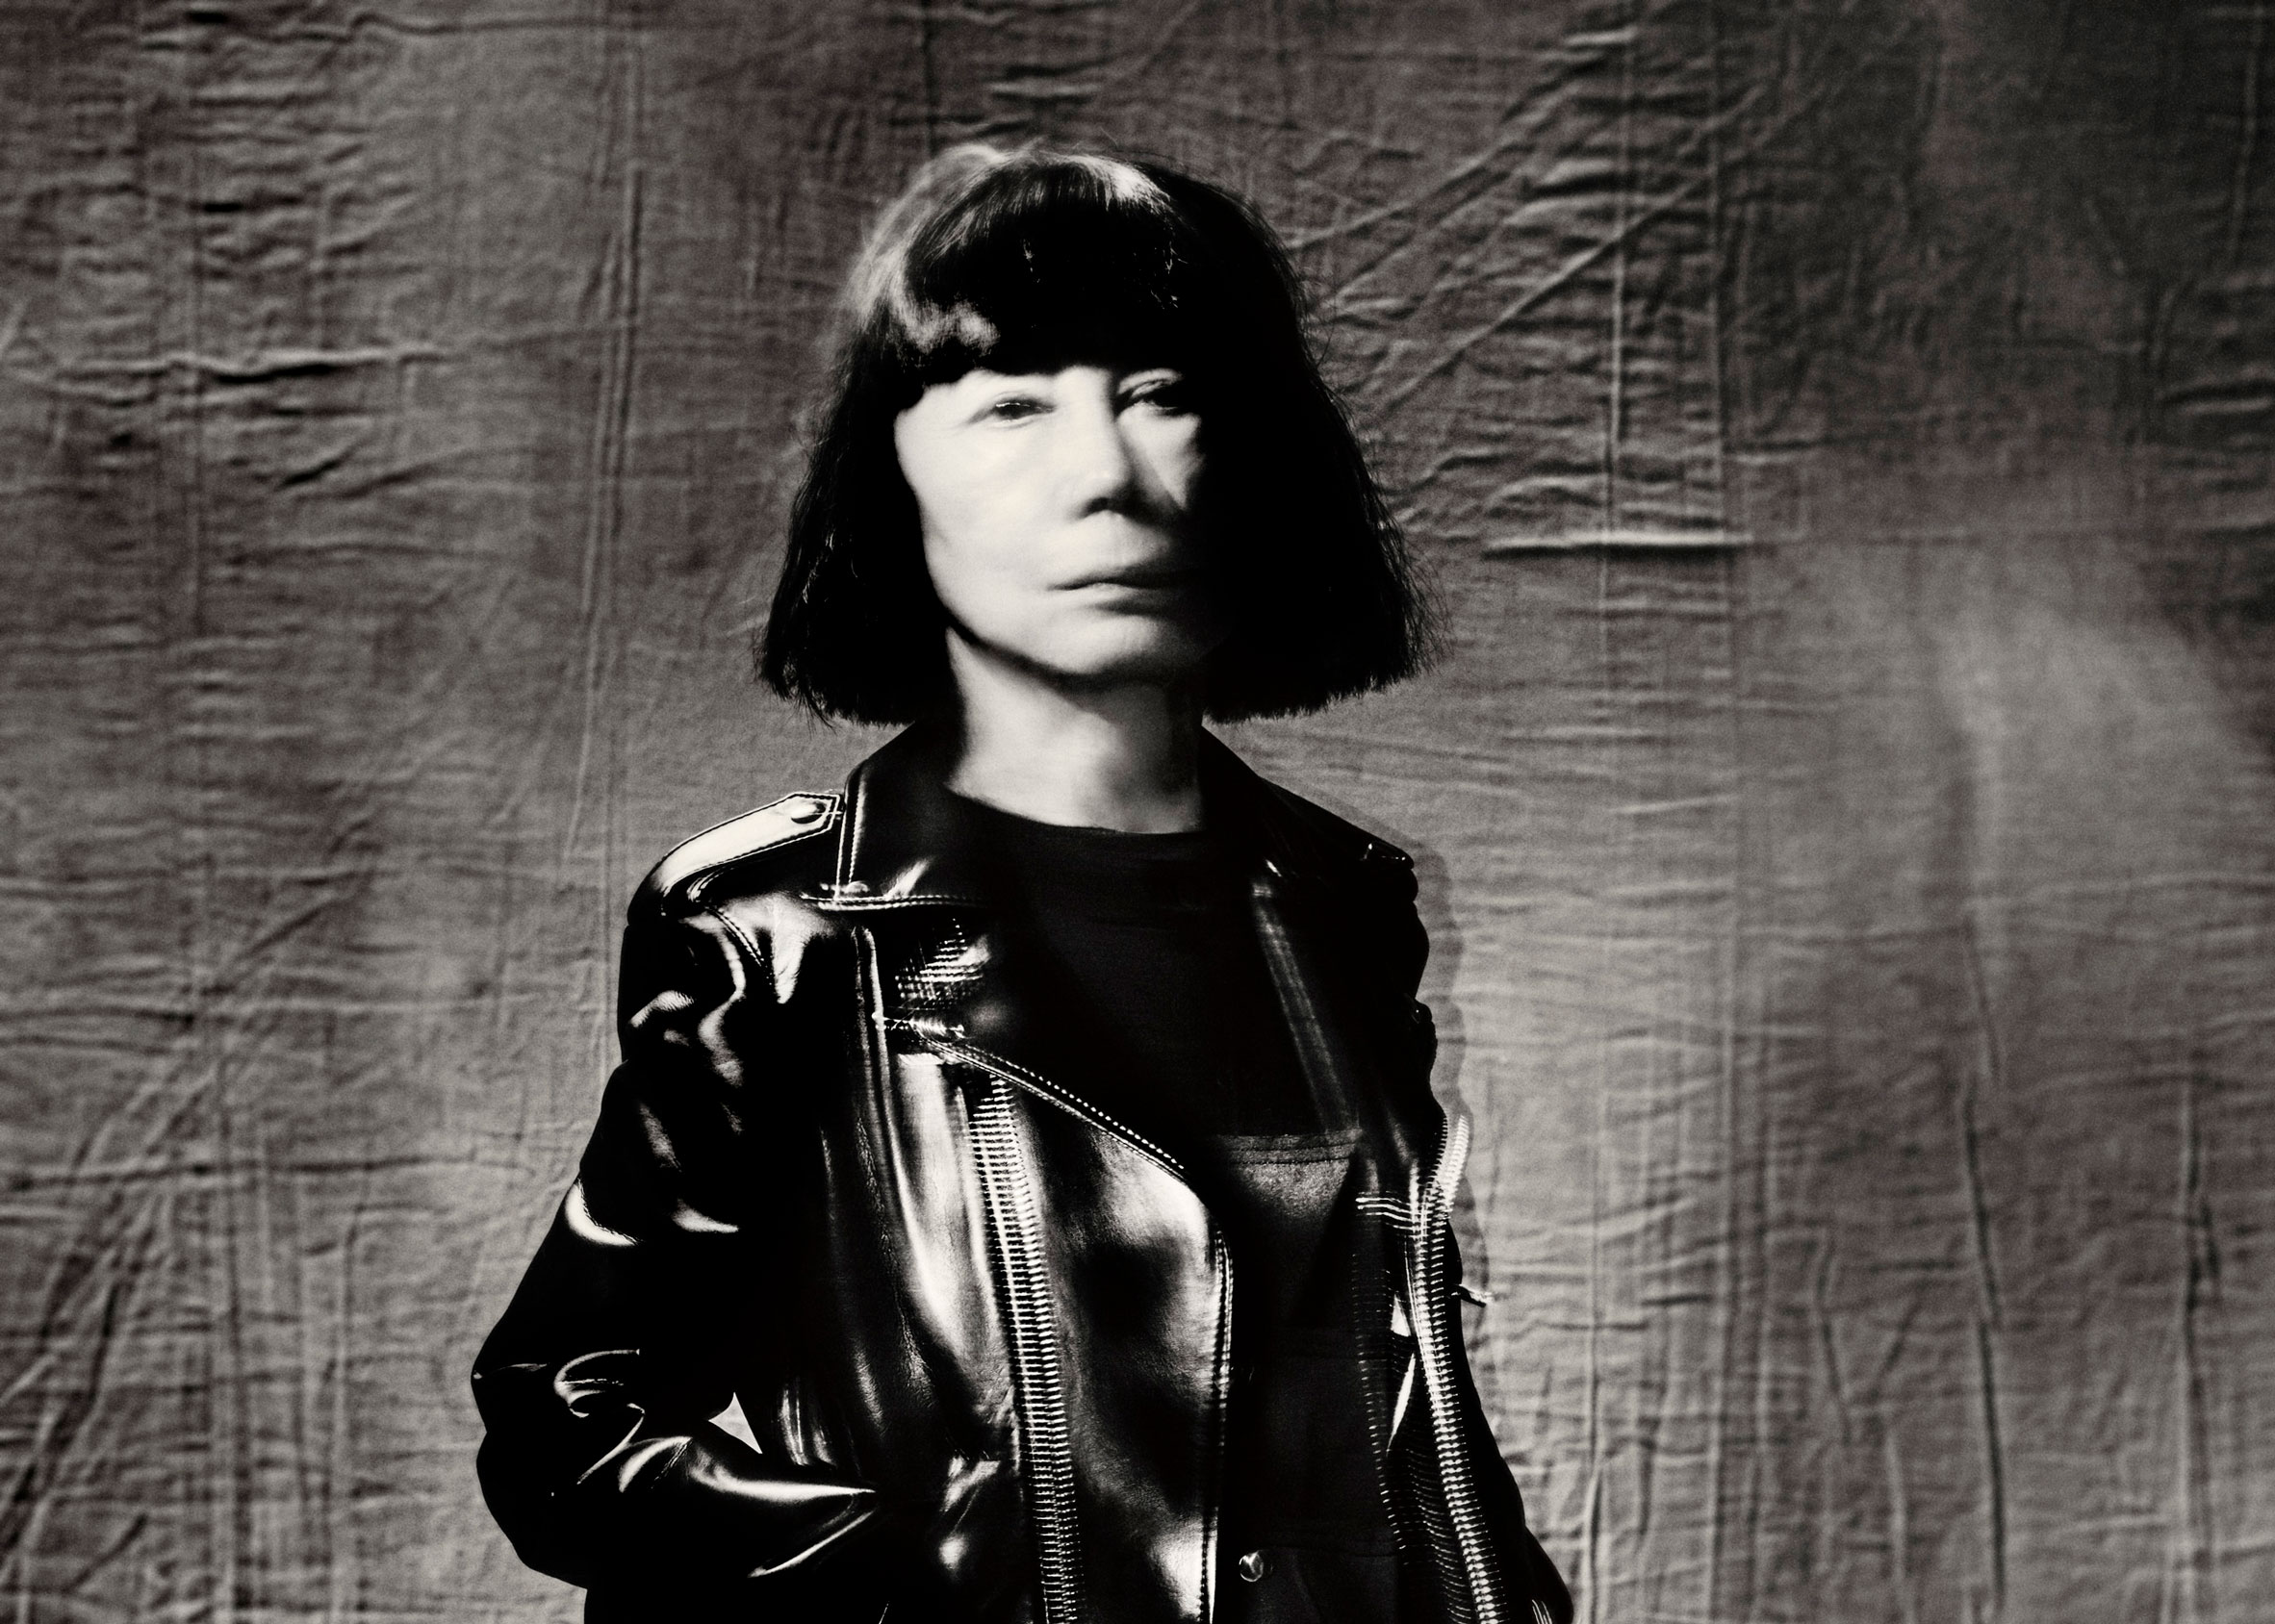 Rei Kawakubo and comme des garcons